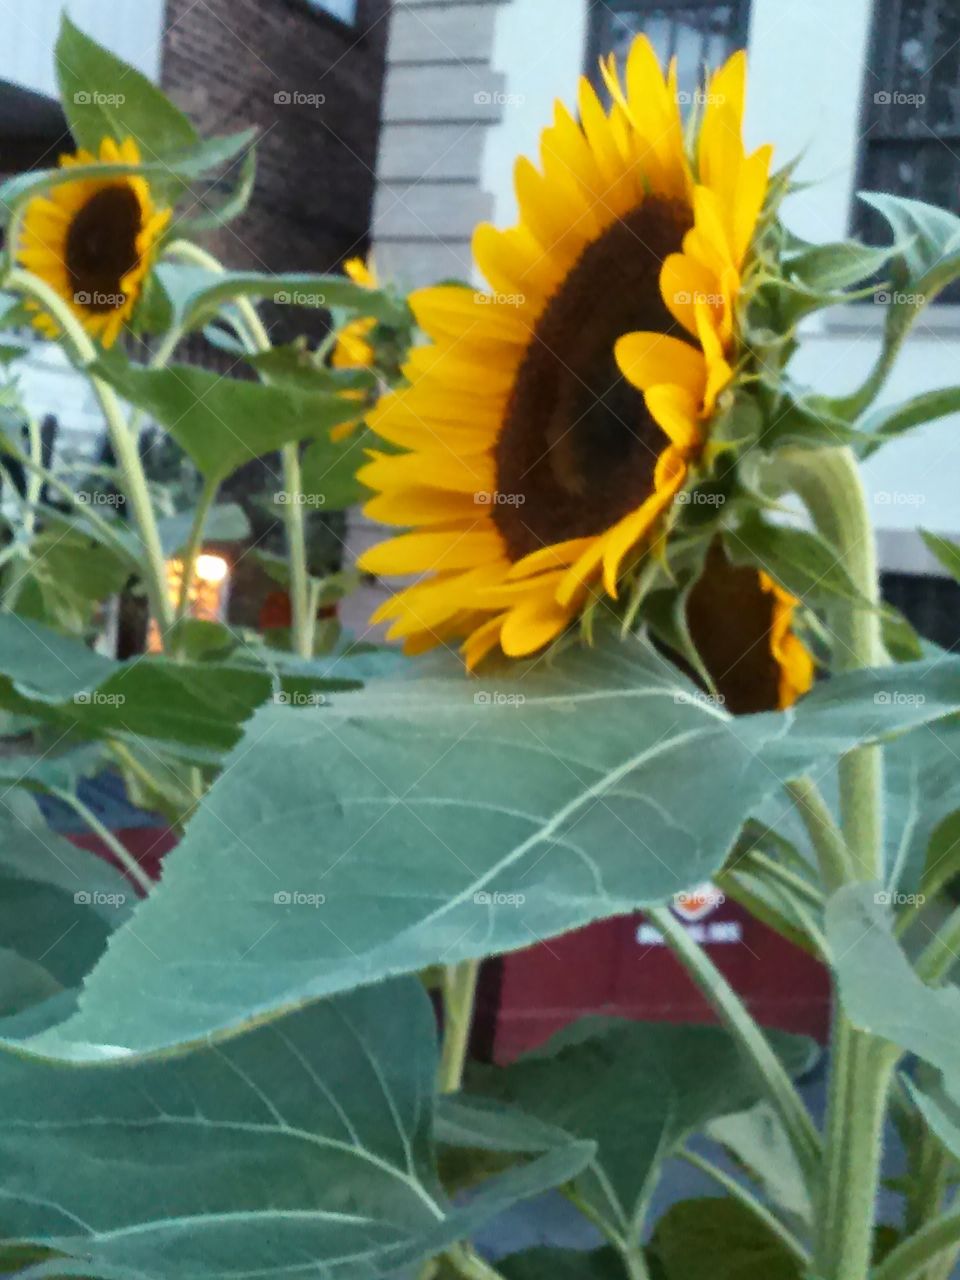 sunflower power. took a walk and found a florist growing these guys